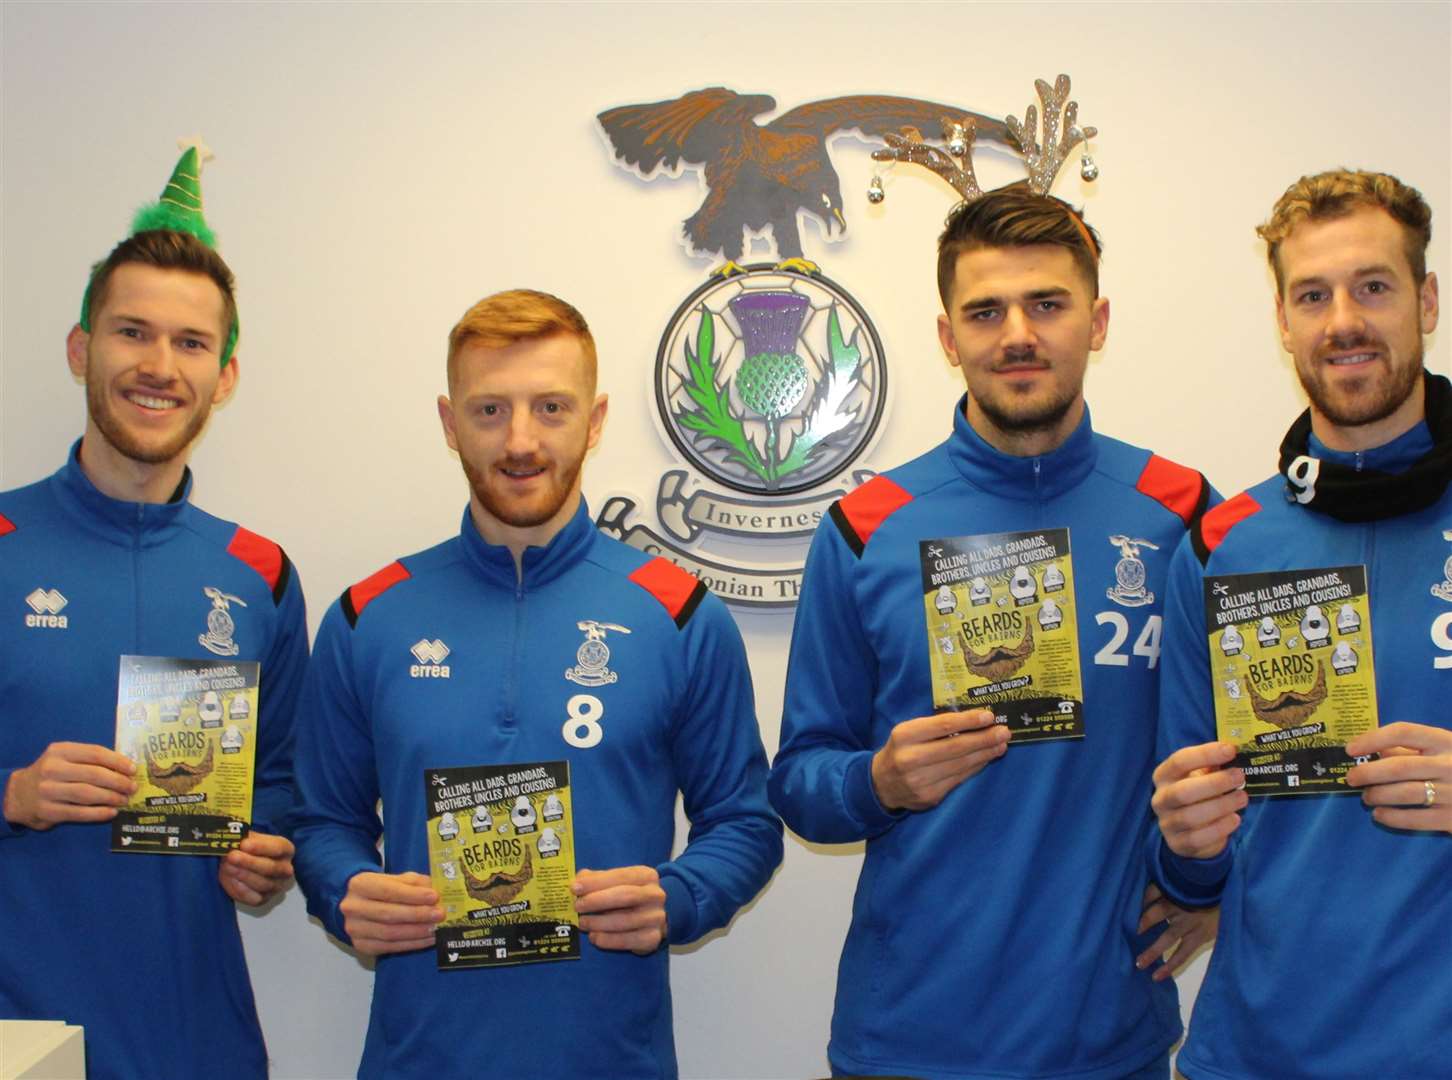 ICT players Jamie McCart, David Carson, Charlie Trafford and Jordan White are backing Beards for Bairns.